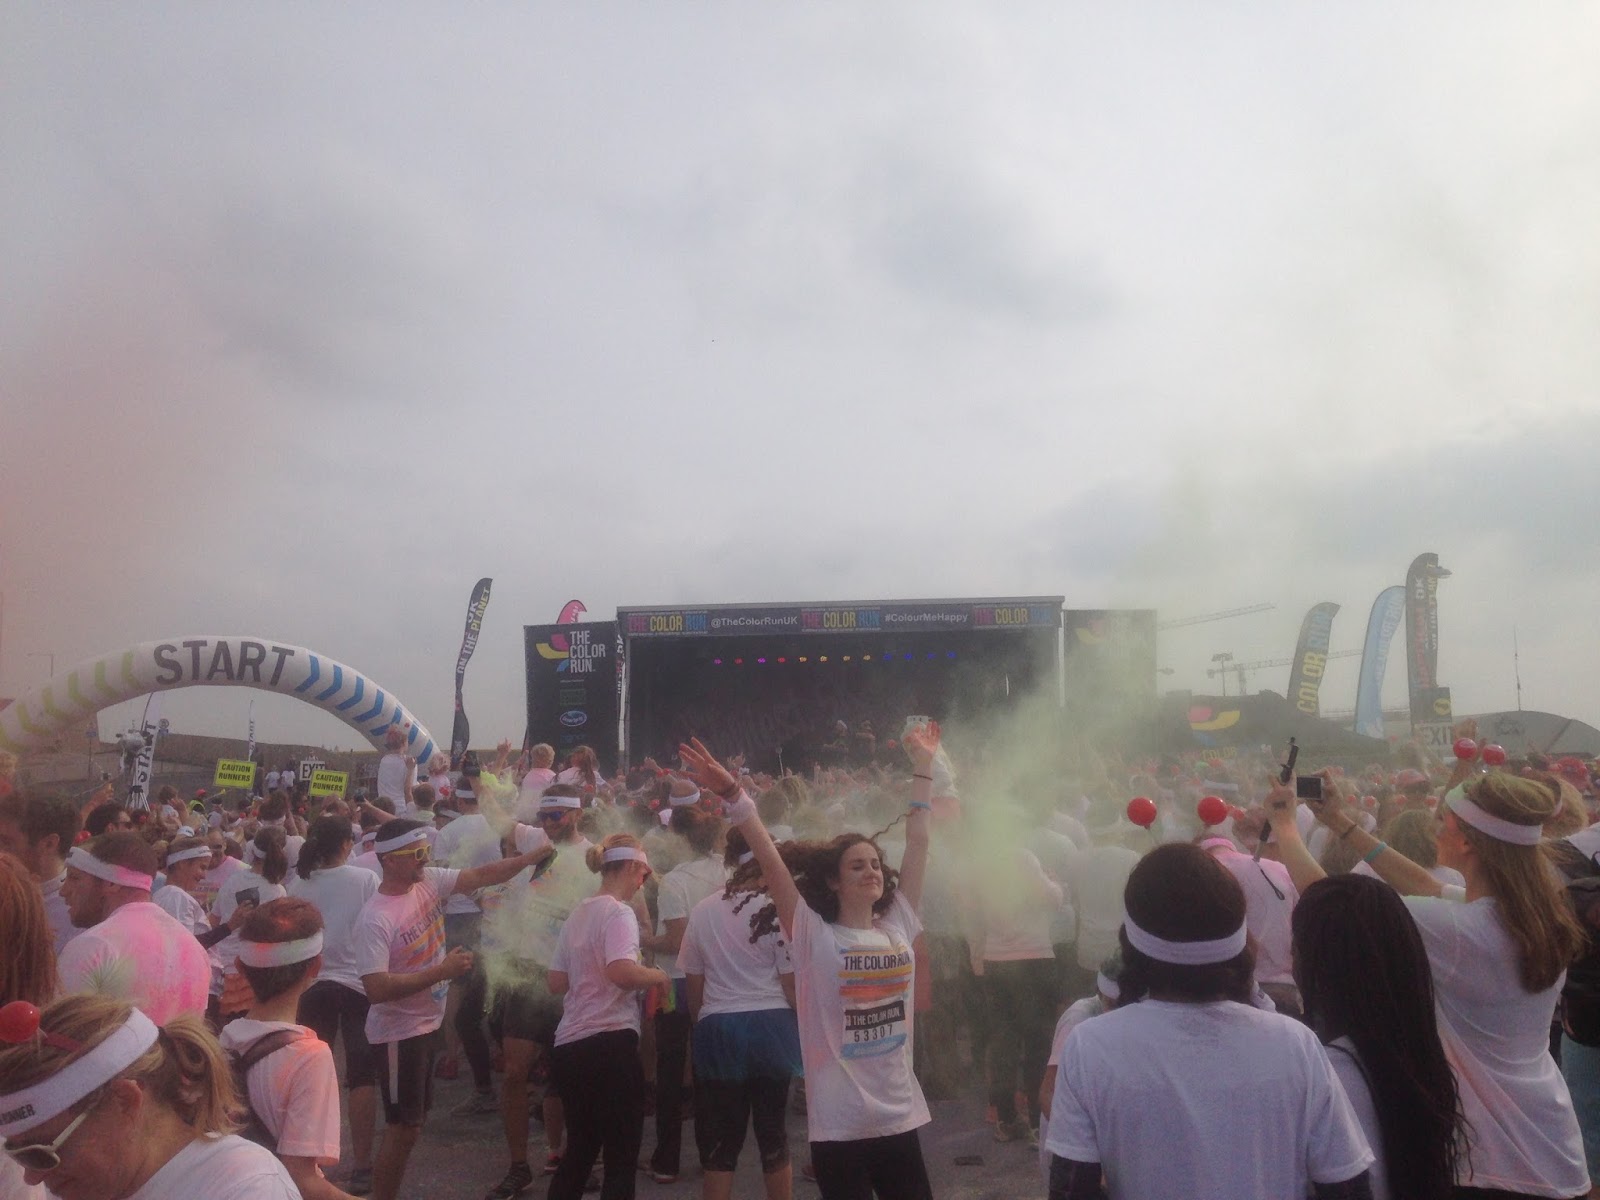 FitBits | Brighton Color Run after party 2015